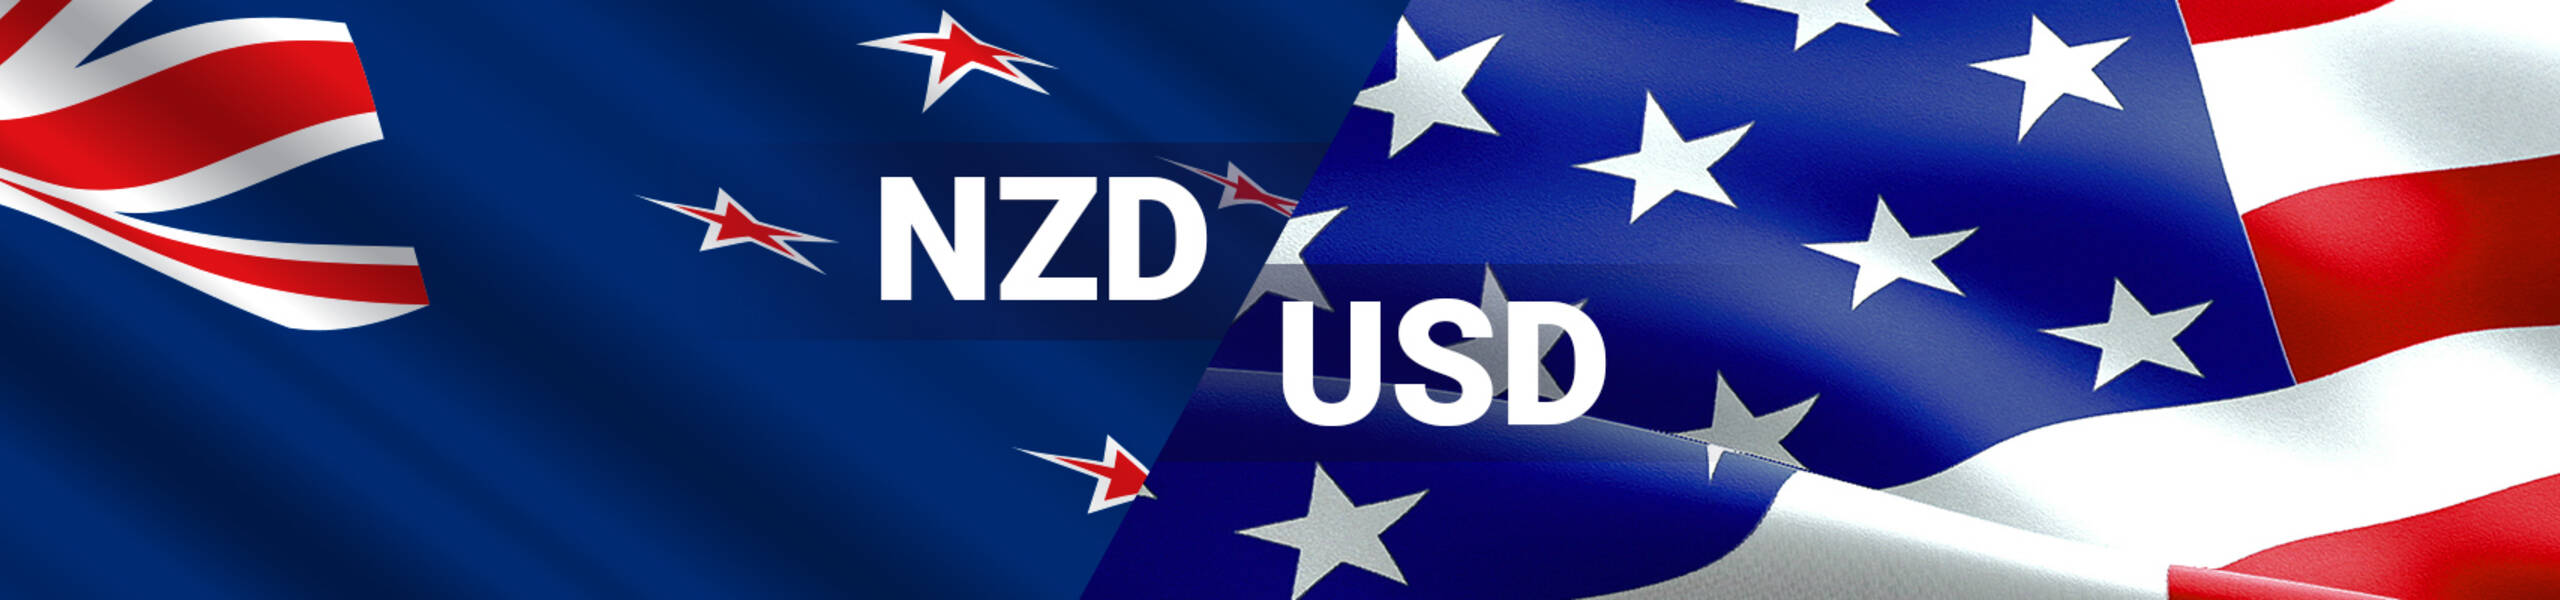 NZD/USD with heavy sellers concentration around 0.7038